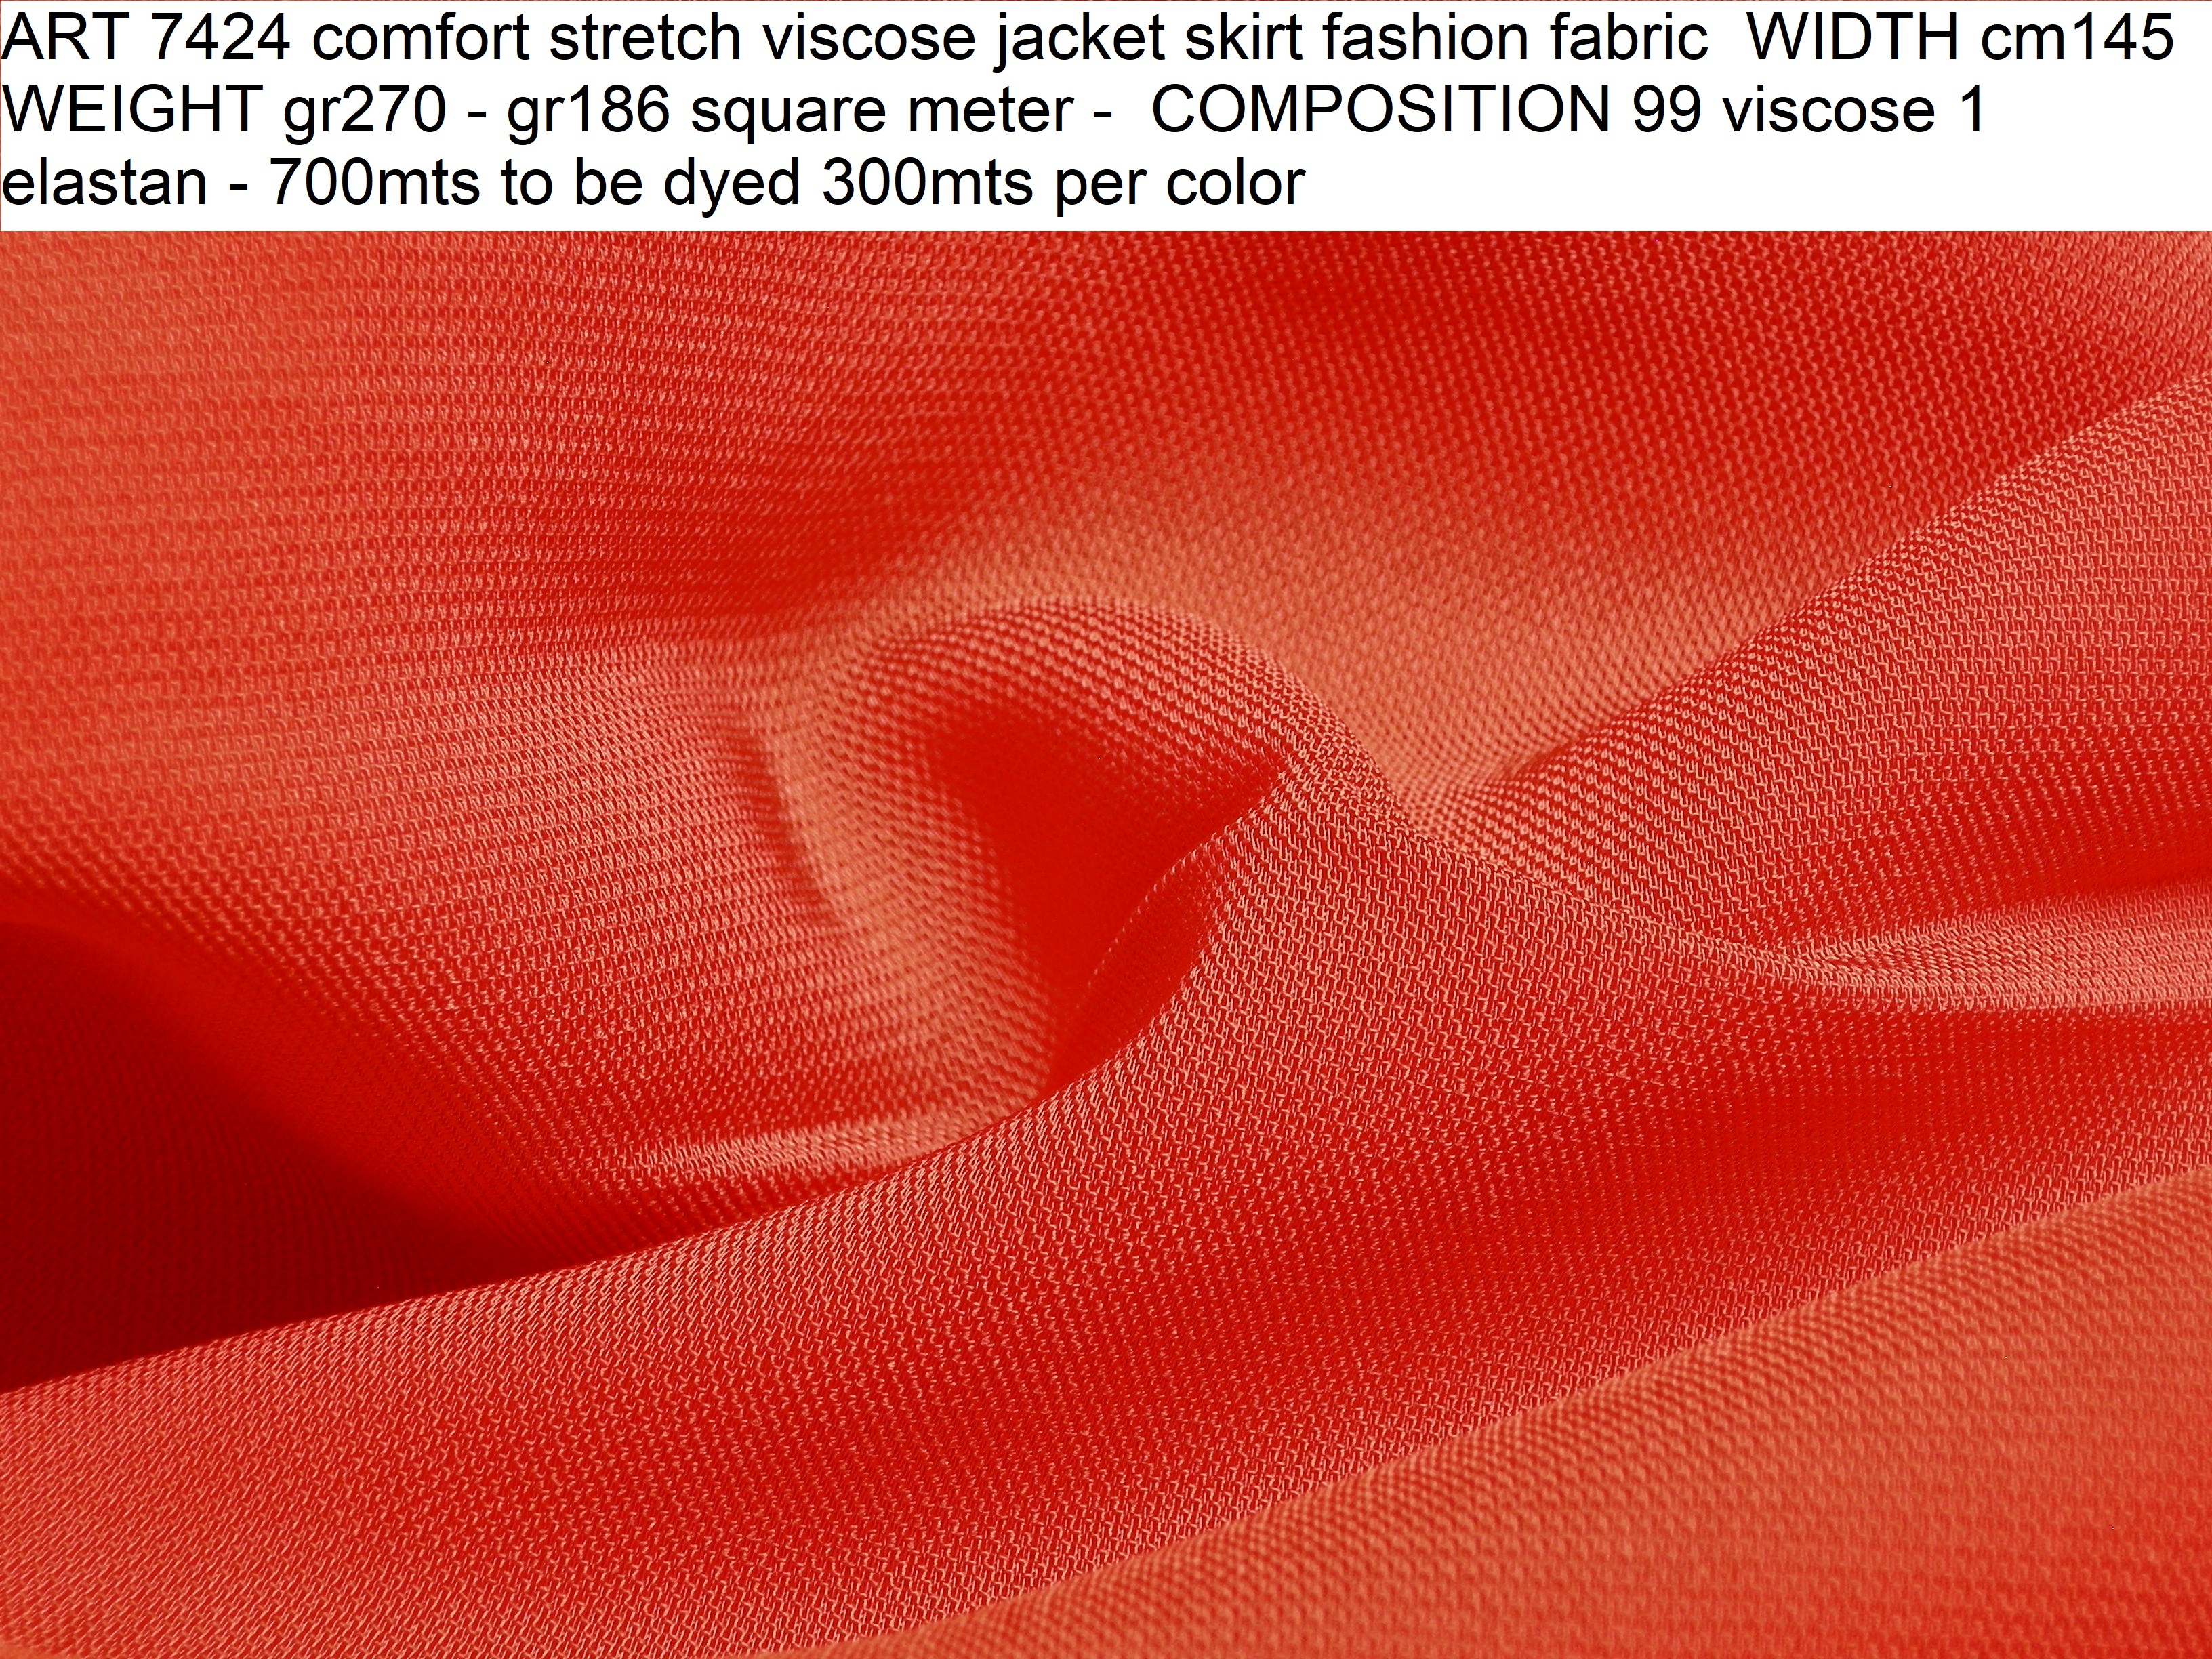 ART 7424 comfort stretch viscose jacket skirt fashion fabric WIDTH cm145 WEIGHT gr270 - gr186 square meter - COMPOSITION 99 viscose 1 elastan - 700mts to be dyed 300mts per color